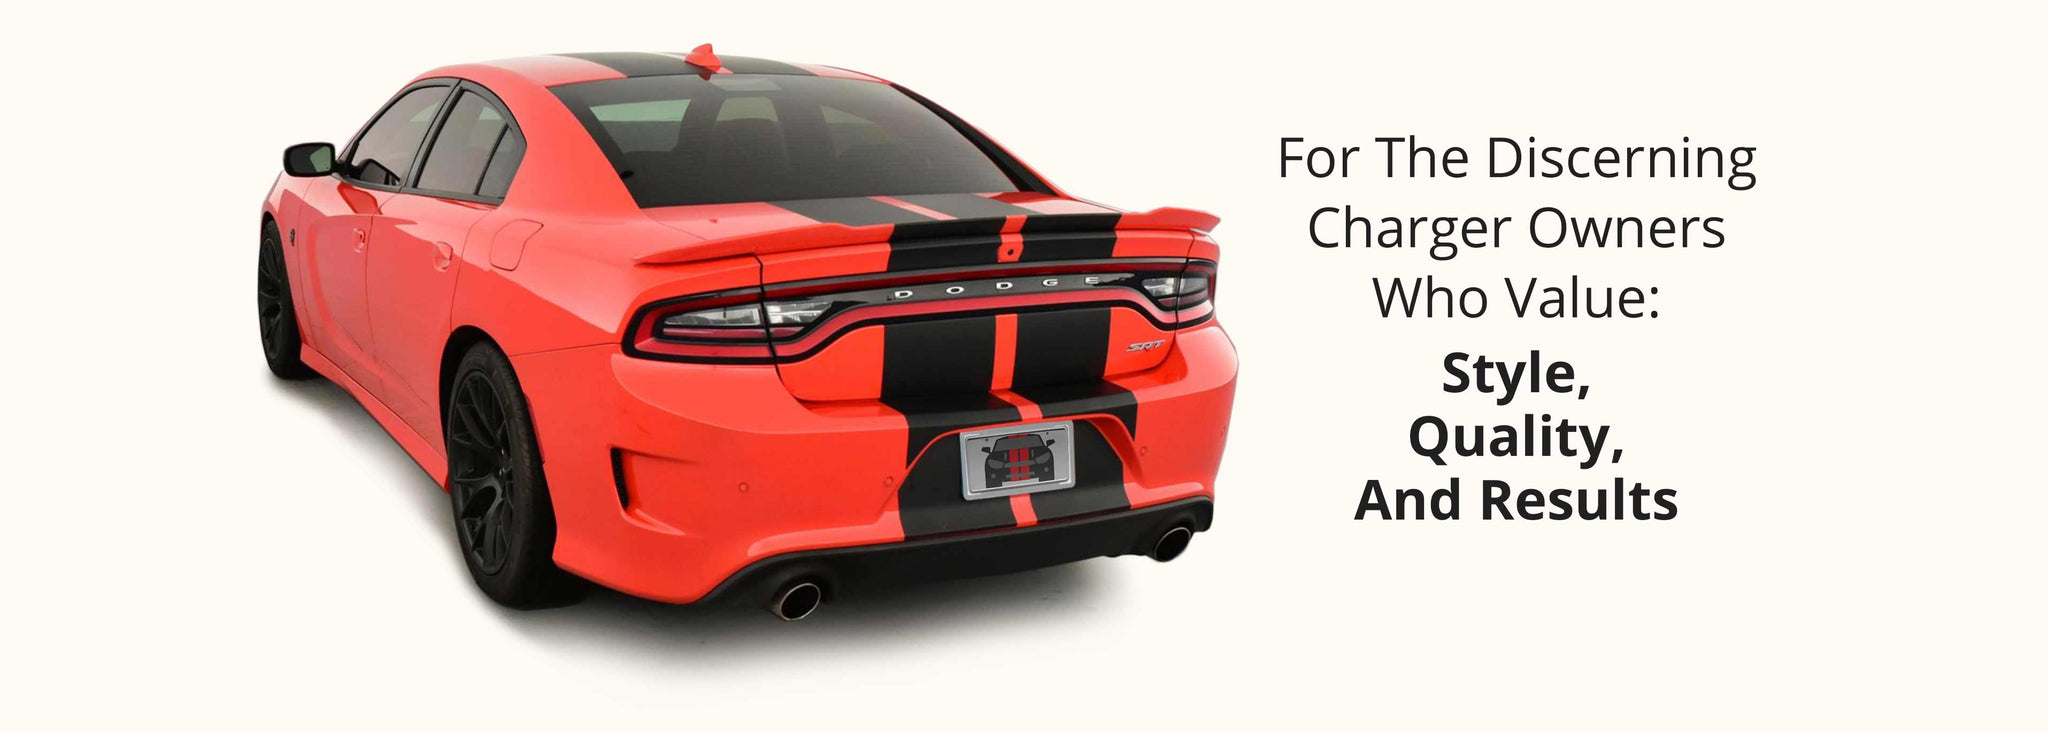 Dodge Charger Hellcat Racing Stripes (Twin Rally Stripes with Optional Pinstriping, 2015-2022) - Stripe Source